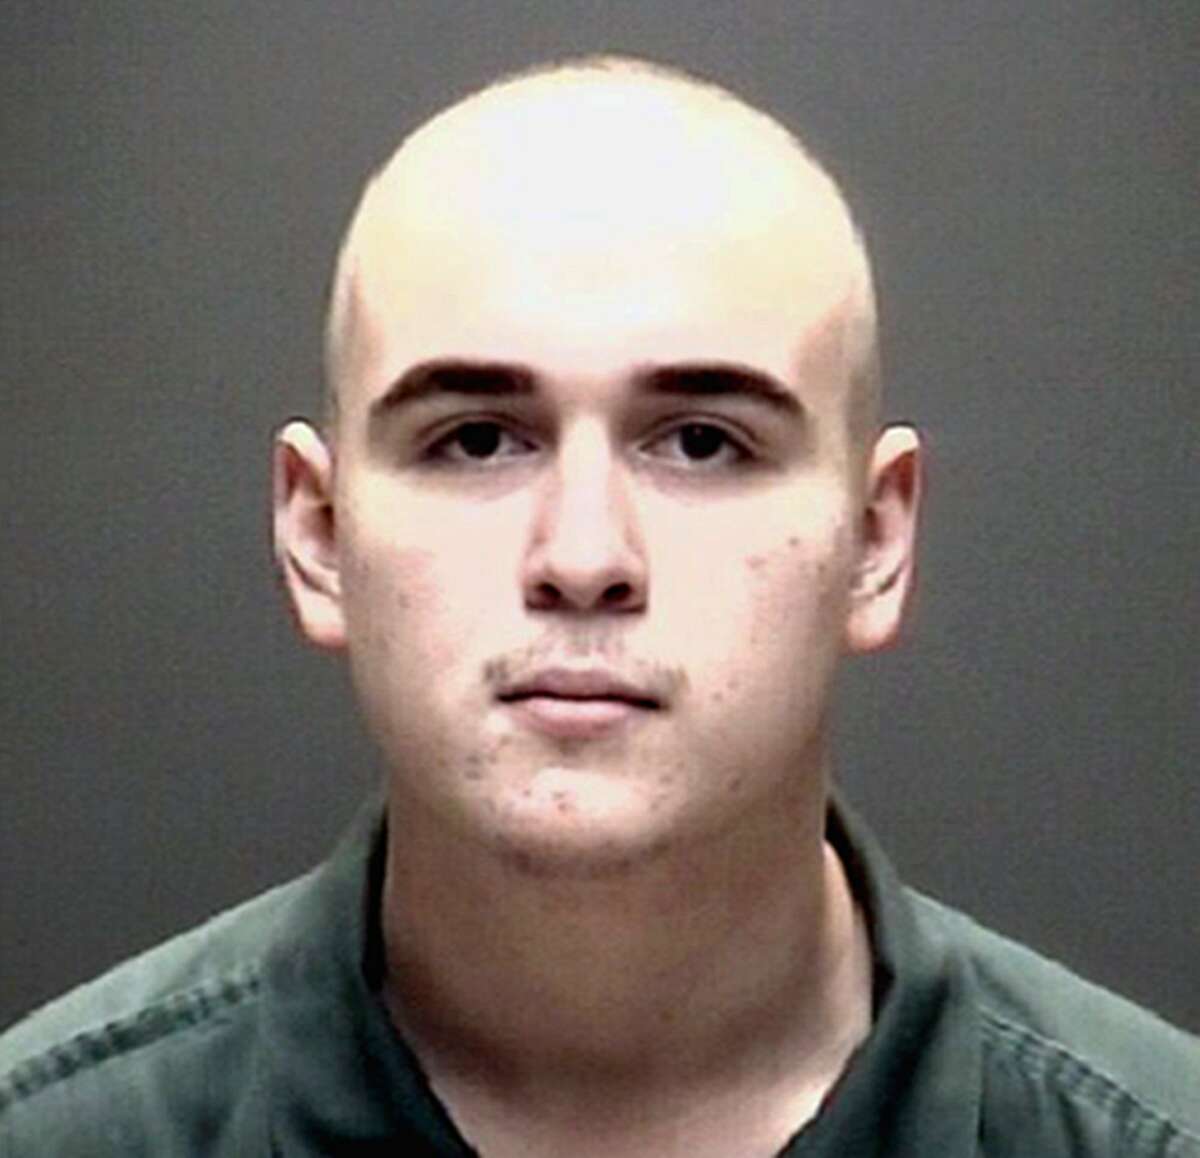 FILE - This file photo provided by the Galveston County Jail in Galveston, Texas, hows Dimitrios Pagourtzis. A change of venue is being sought for Pagourtzis, who is charged with capital murder in the fatal shooting of 10 people at a Texas high school on May 10, 2018. Attorneys for Pagourtzis filed a motion Tuesday, Jan. 8, 2019, in Galveston County District Court saying media coverage prejudice within the community prevents Pagourtzis from receiving a fair trial. (Galveston County Jail via AP, File)